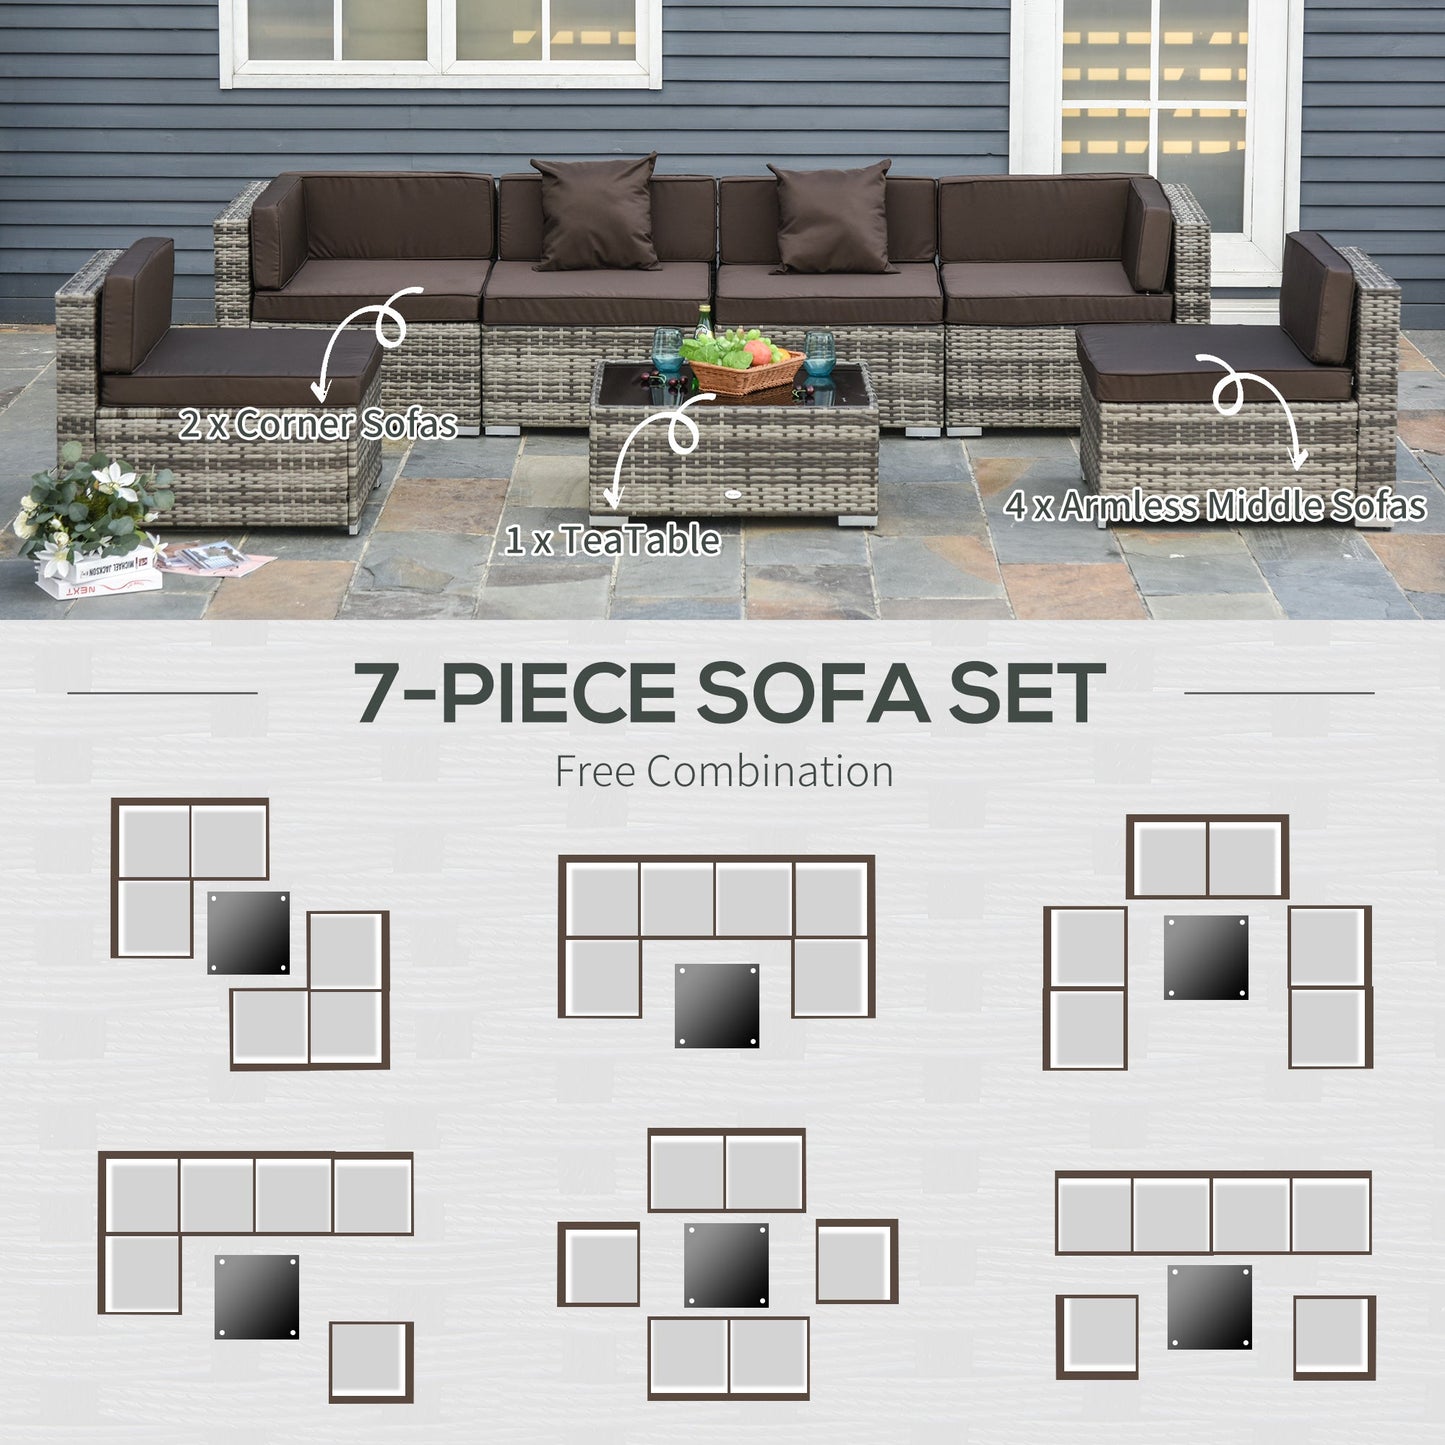 Outdoor and Garden-7-Piece Patio Furniture Sets Outdoor Wicker Conversation Sets PE Rattan Sectional sofa set with Cushions & Tempered Glass Desktop, Charcoal - Outdoor Style Company